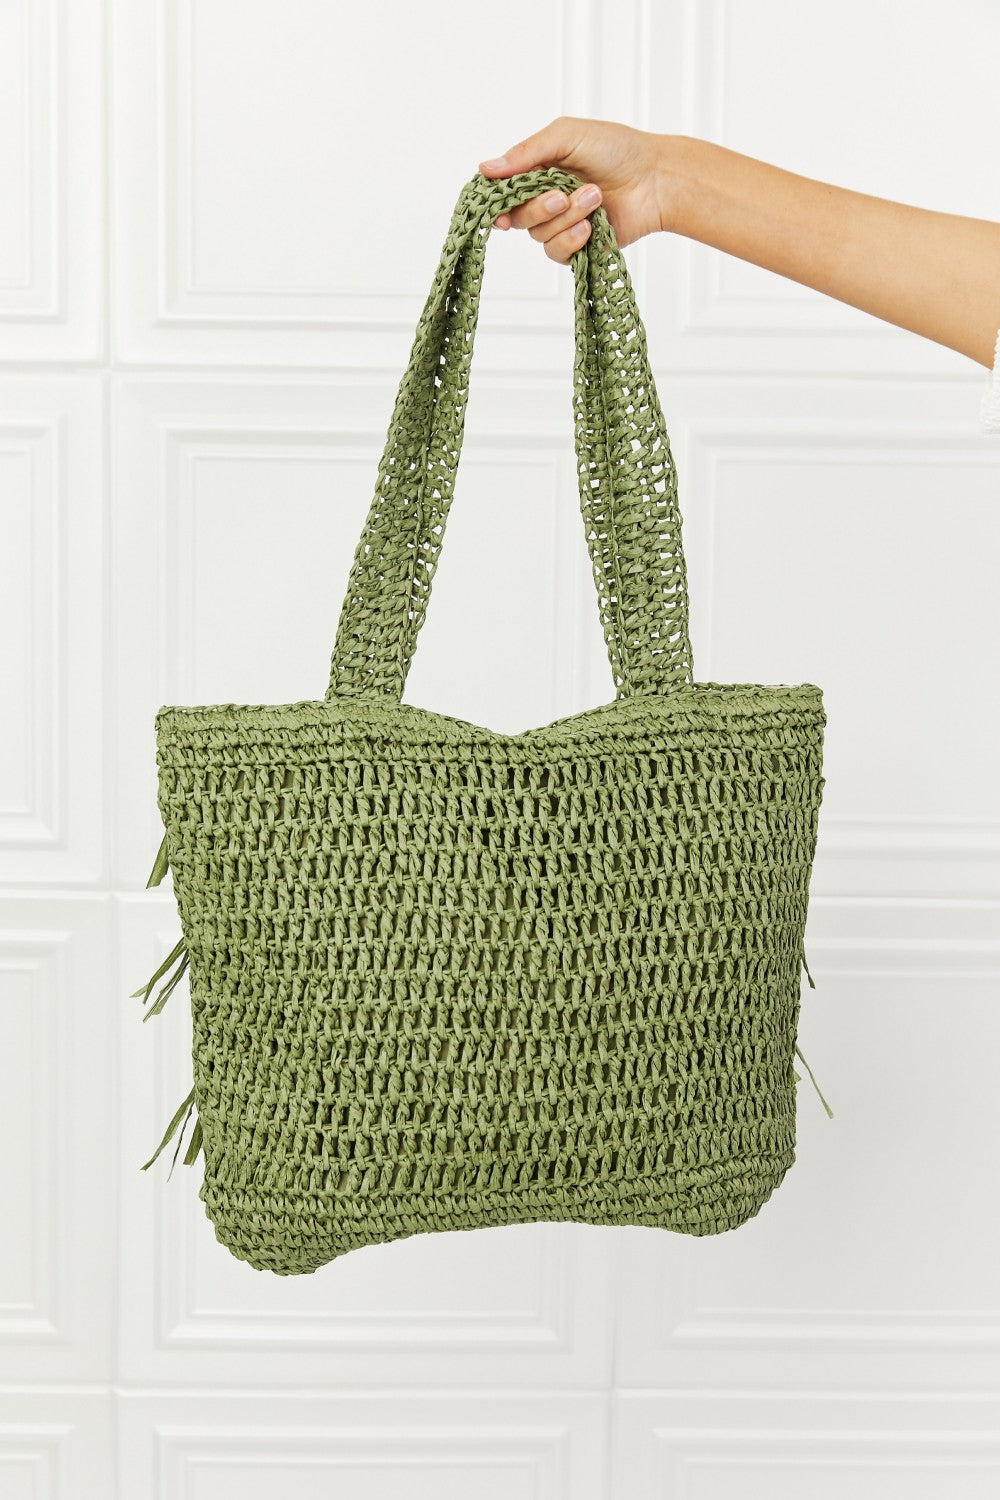 Fame The Last Straw Fringe Straw Tote Bag - BEAUTY COSMOTICS SHOP